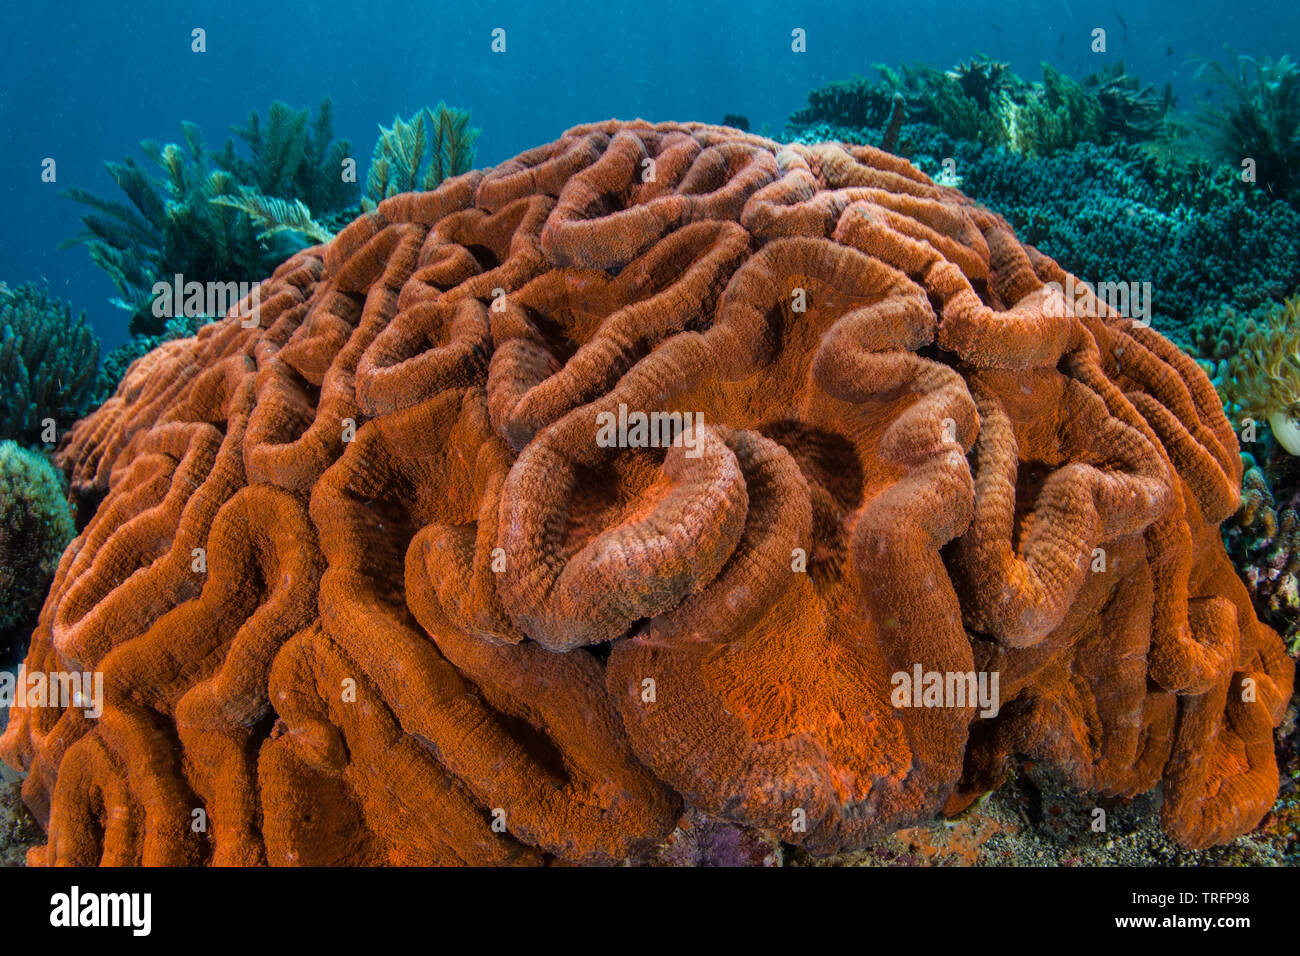 A colorful coral colony, Lobophyllia sp., grows on a coral reef in Komodo National Park, Indonesia. This region harbors high marine biodiversity. Stock Photo